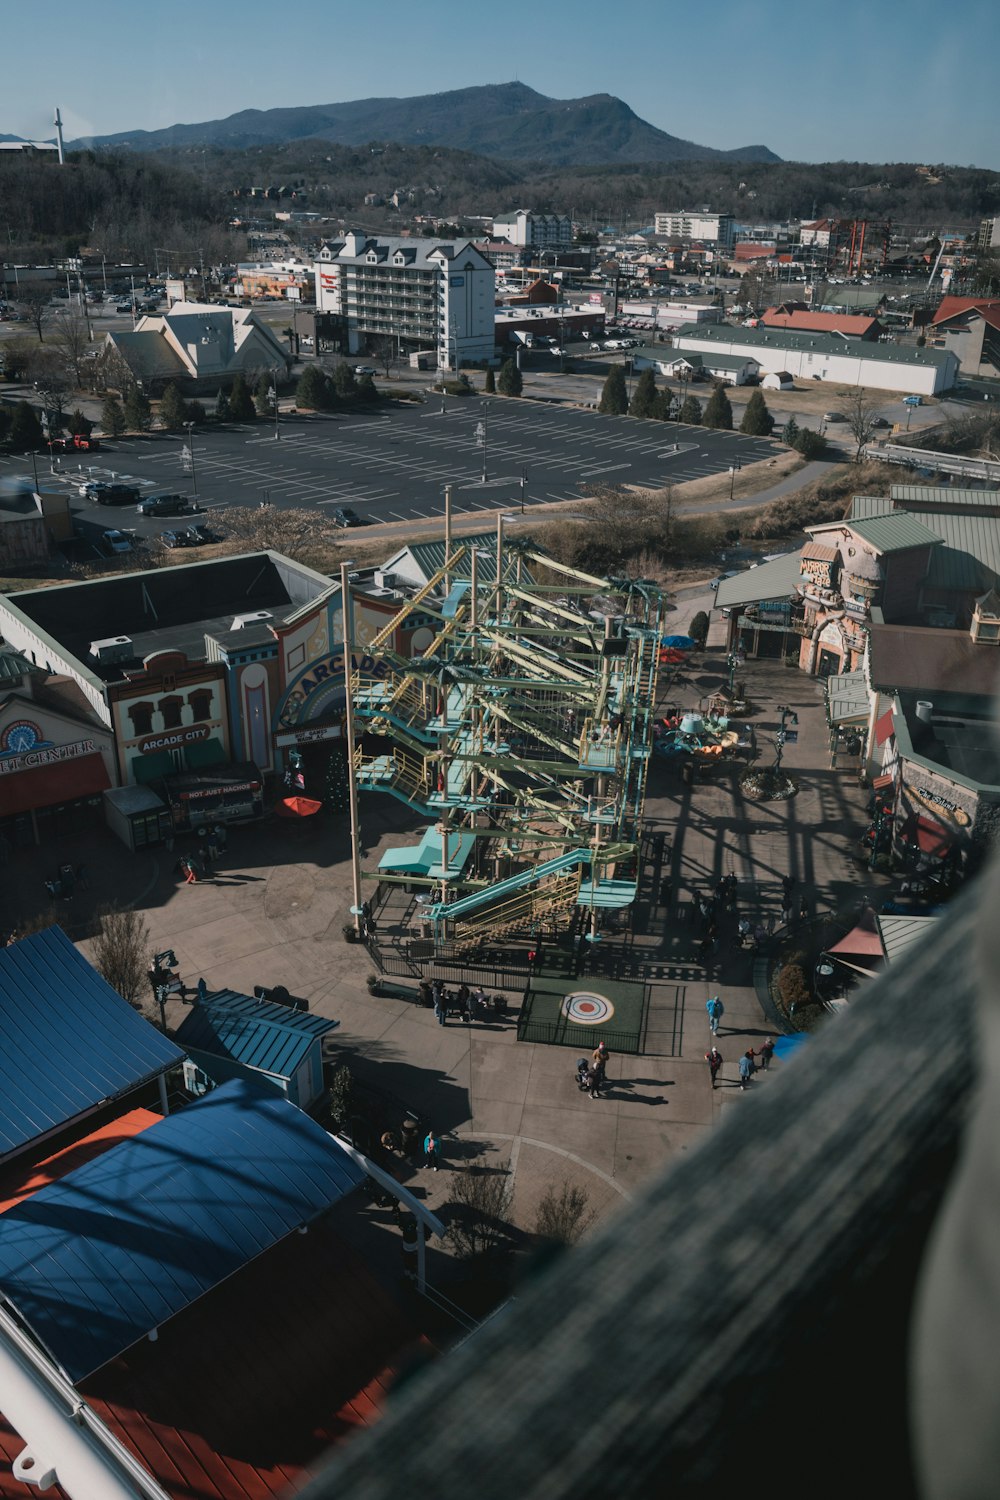 an aerial view of an amusement park in a city